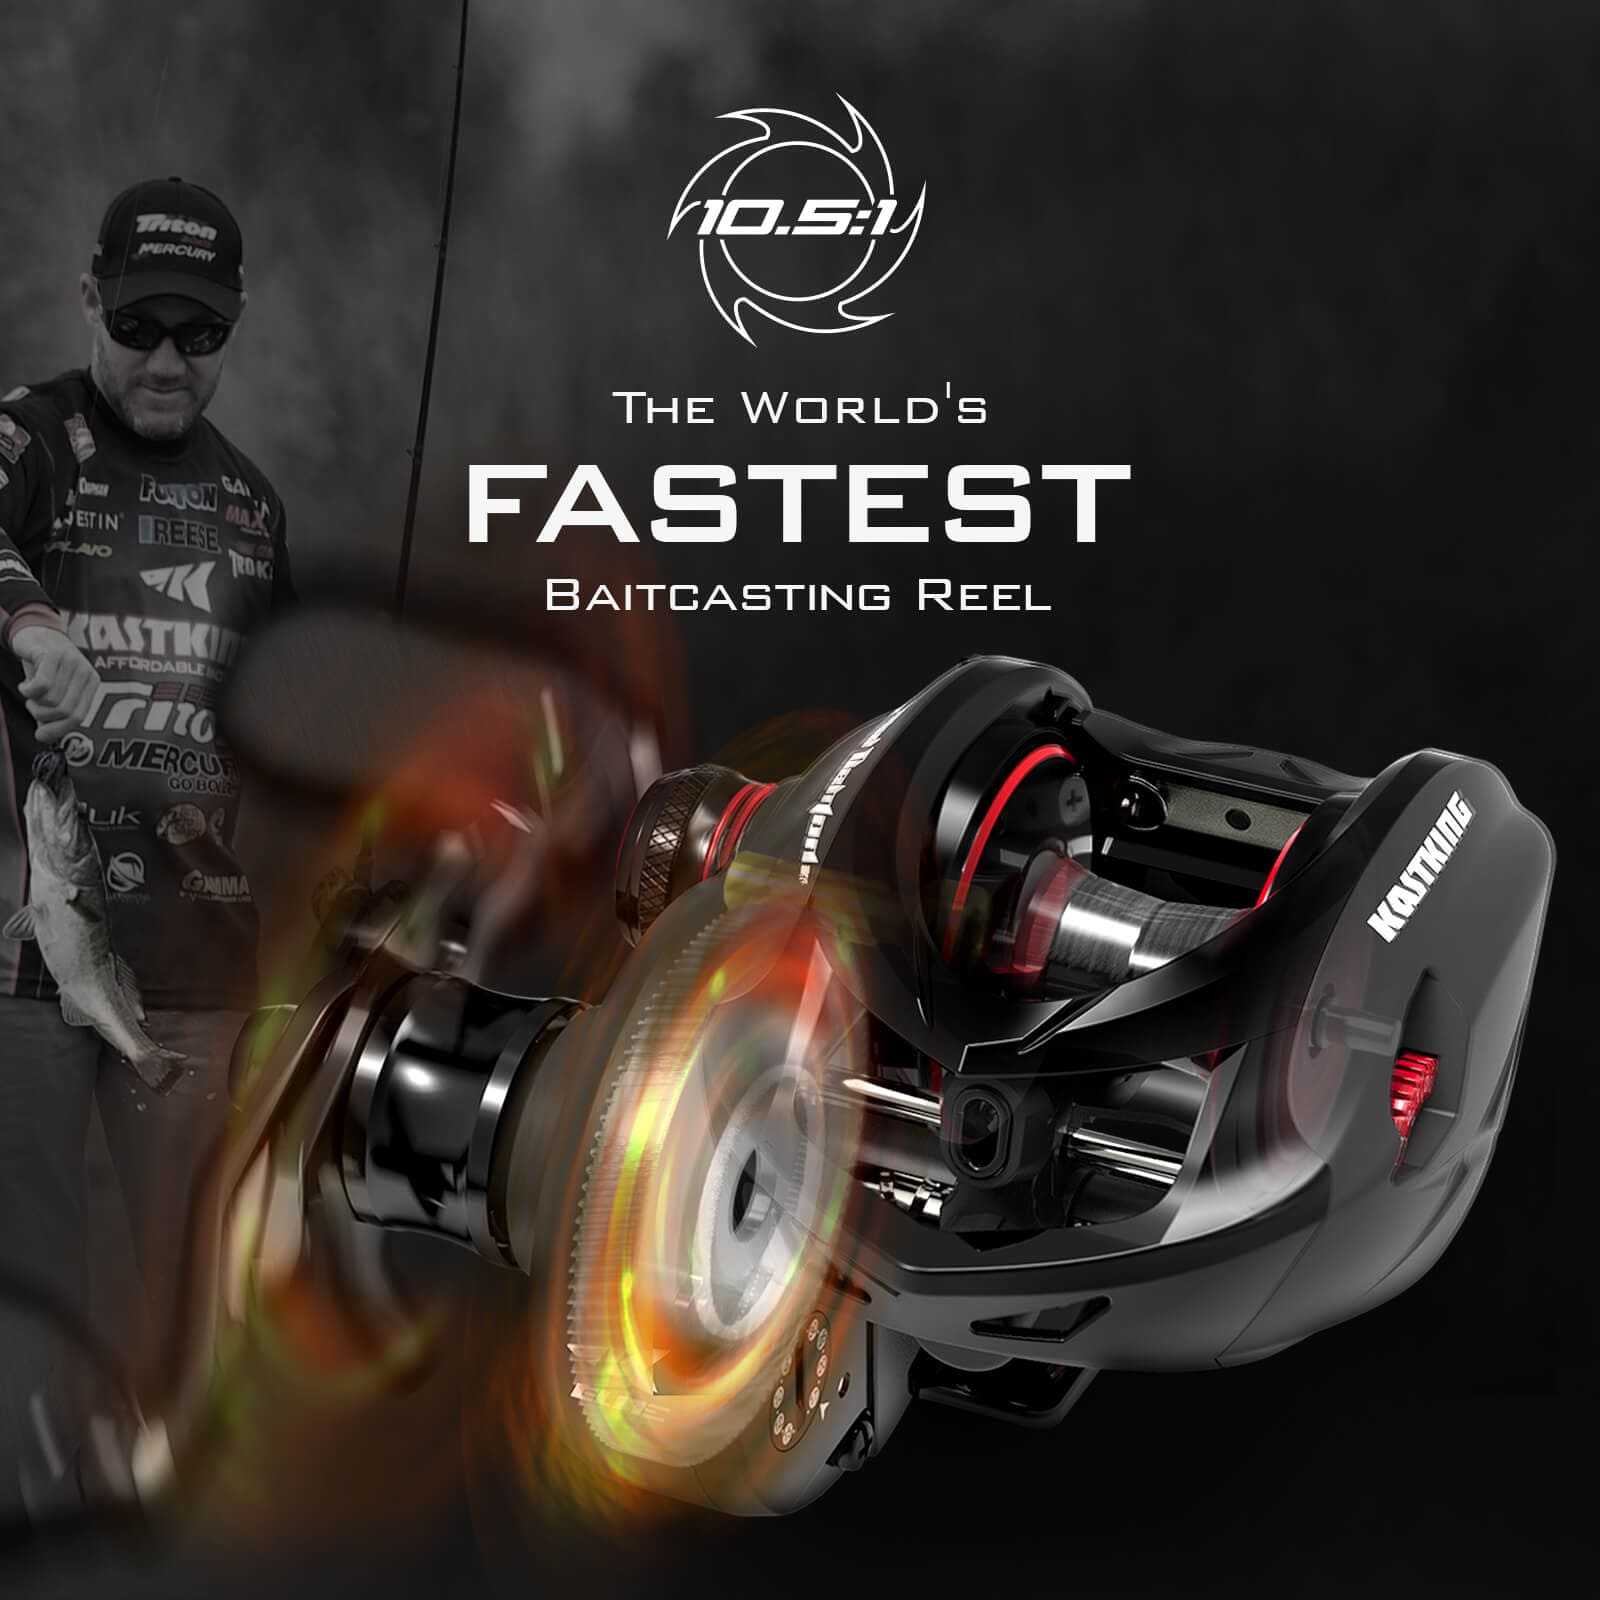 Eposeidon - The KastKing Speed Demon Spinning reel has a Blazing Fast 7.2:1  Gear Ratio so fastit's the fastest in the world! With Aluminum Frame,  Carbon Rotor & Handle, Braid Ready Spool